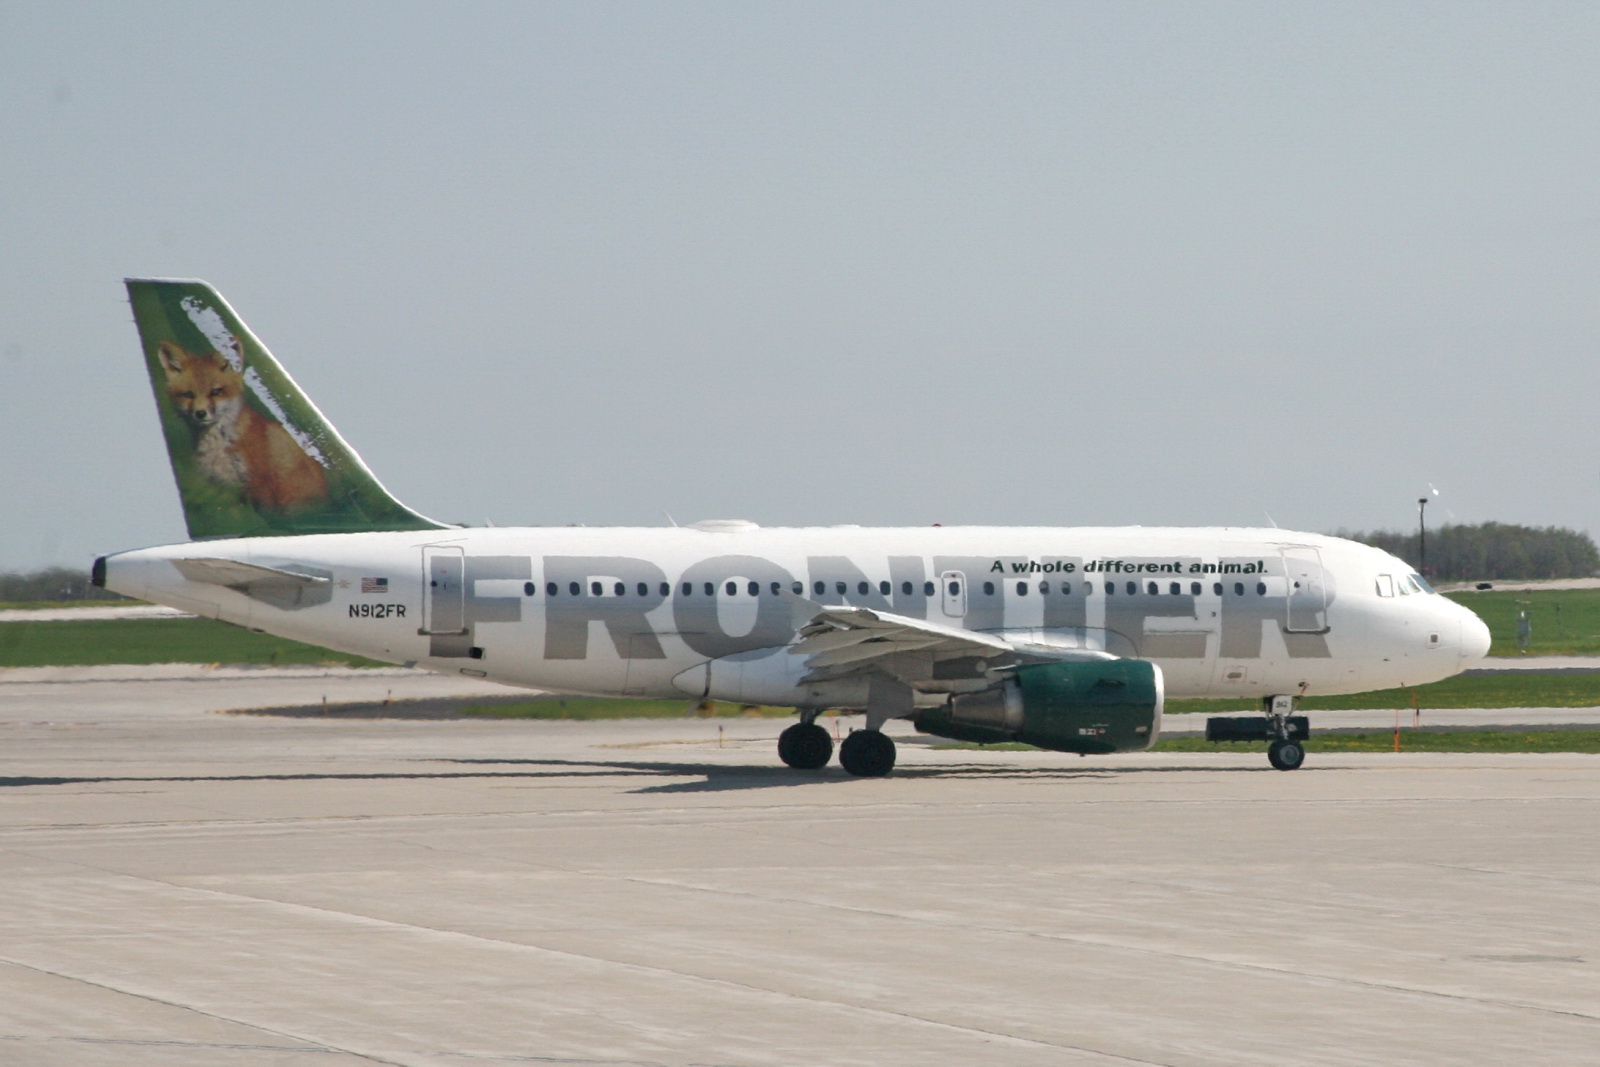 a frontier airline plane is sitting on the runway